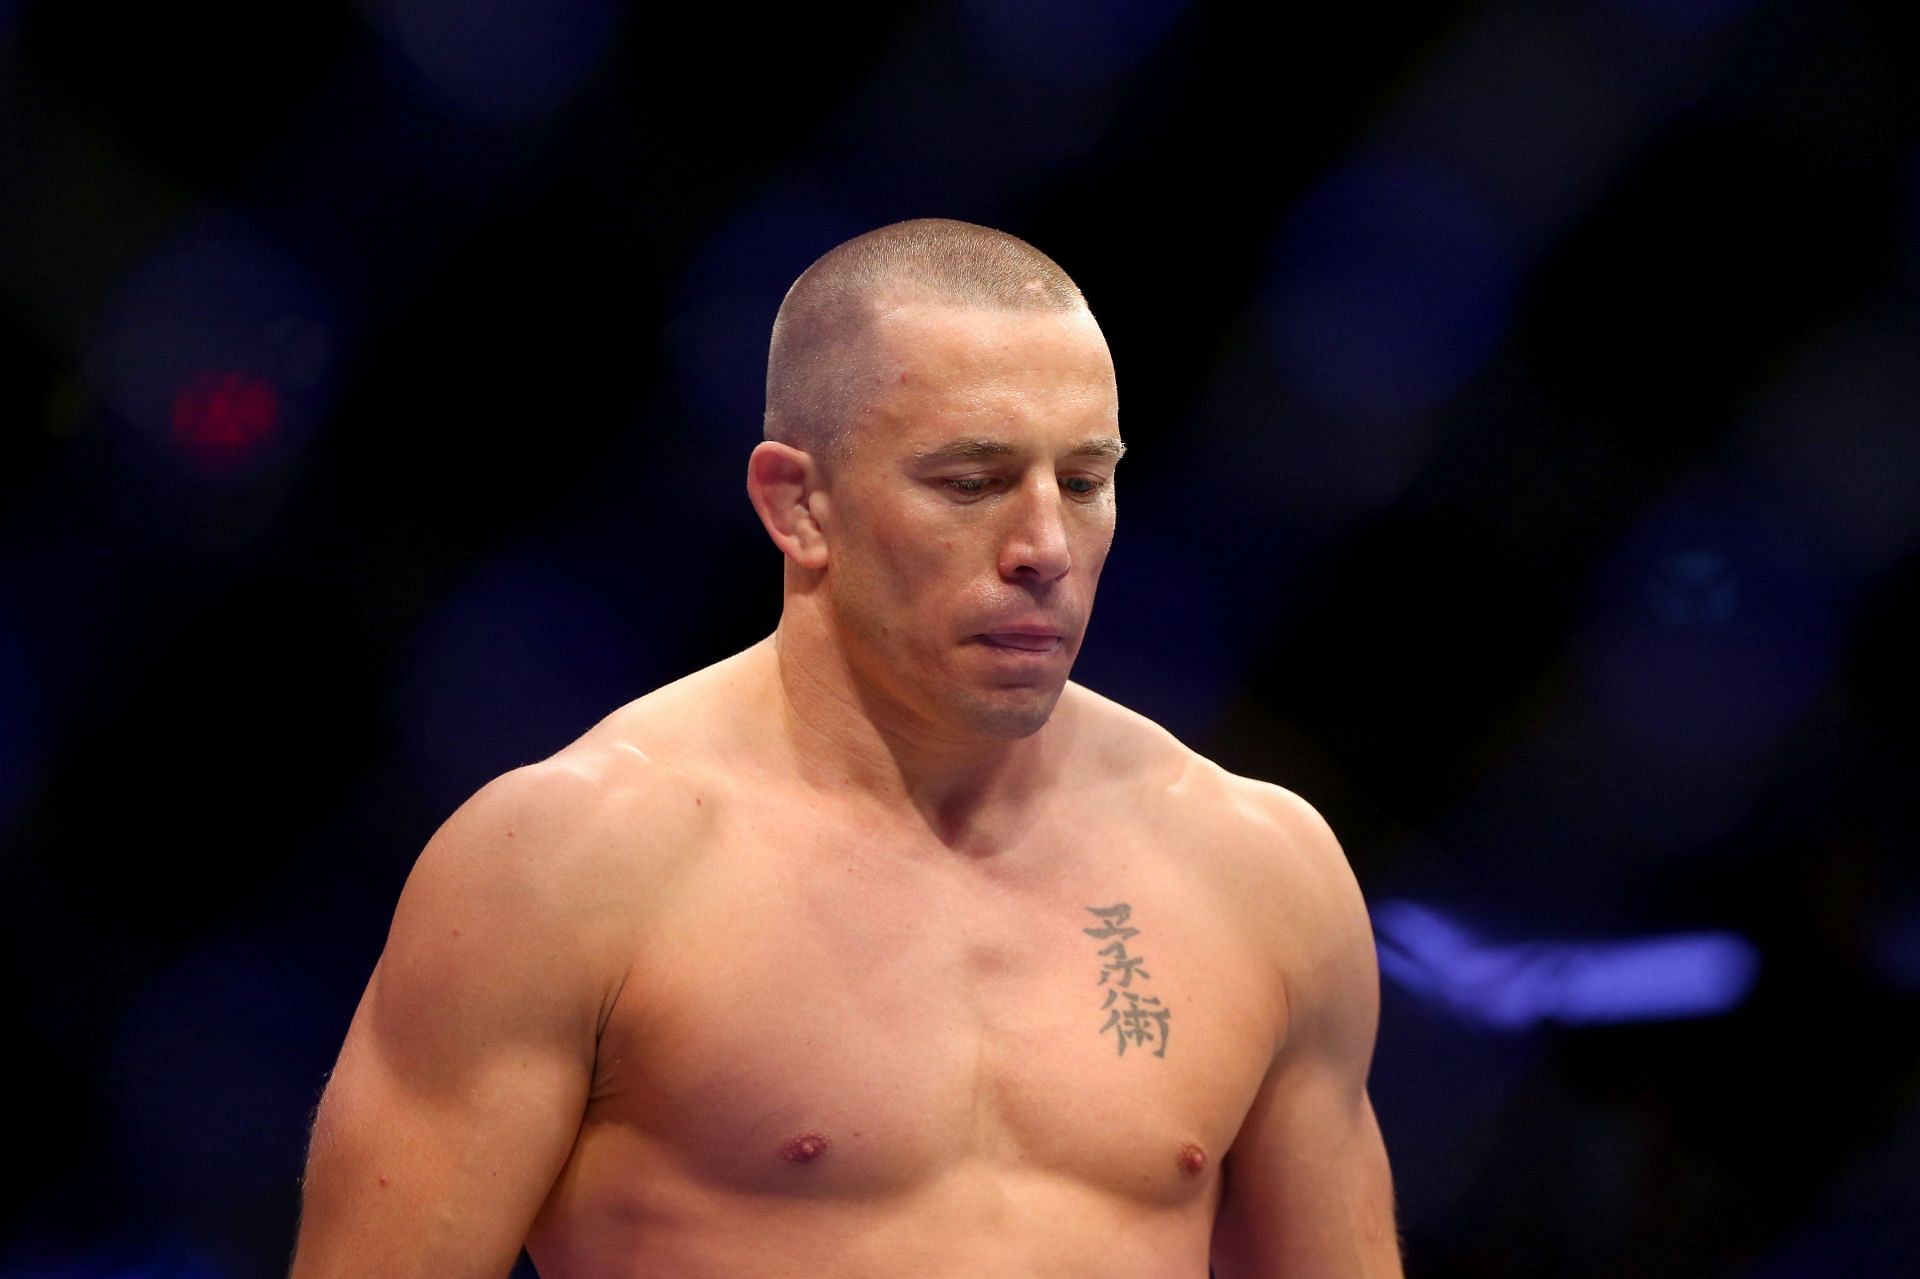 Georges St-Pierre has defeated many Hall of Famers during his legendary career